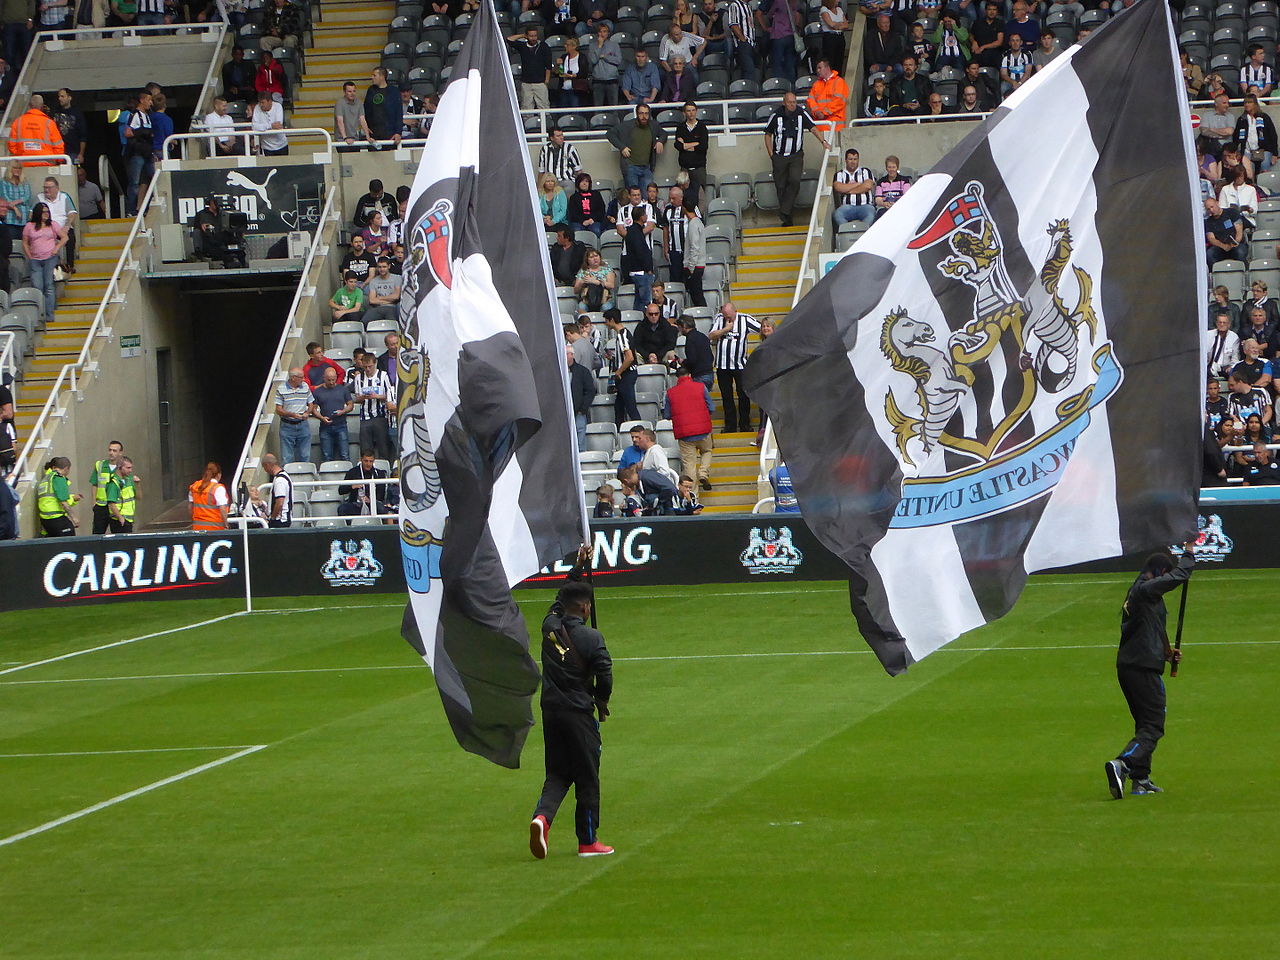 Newcastle United is sold to pif and is expected to reach heights.